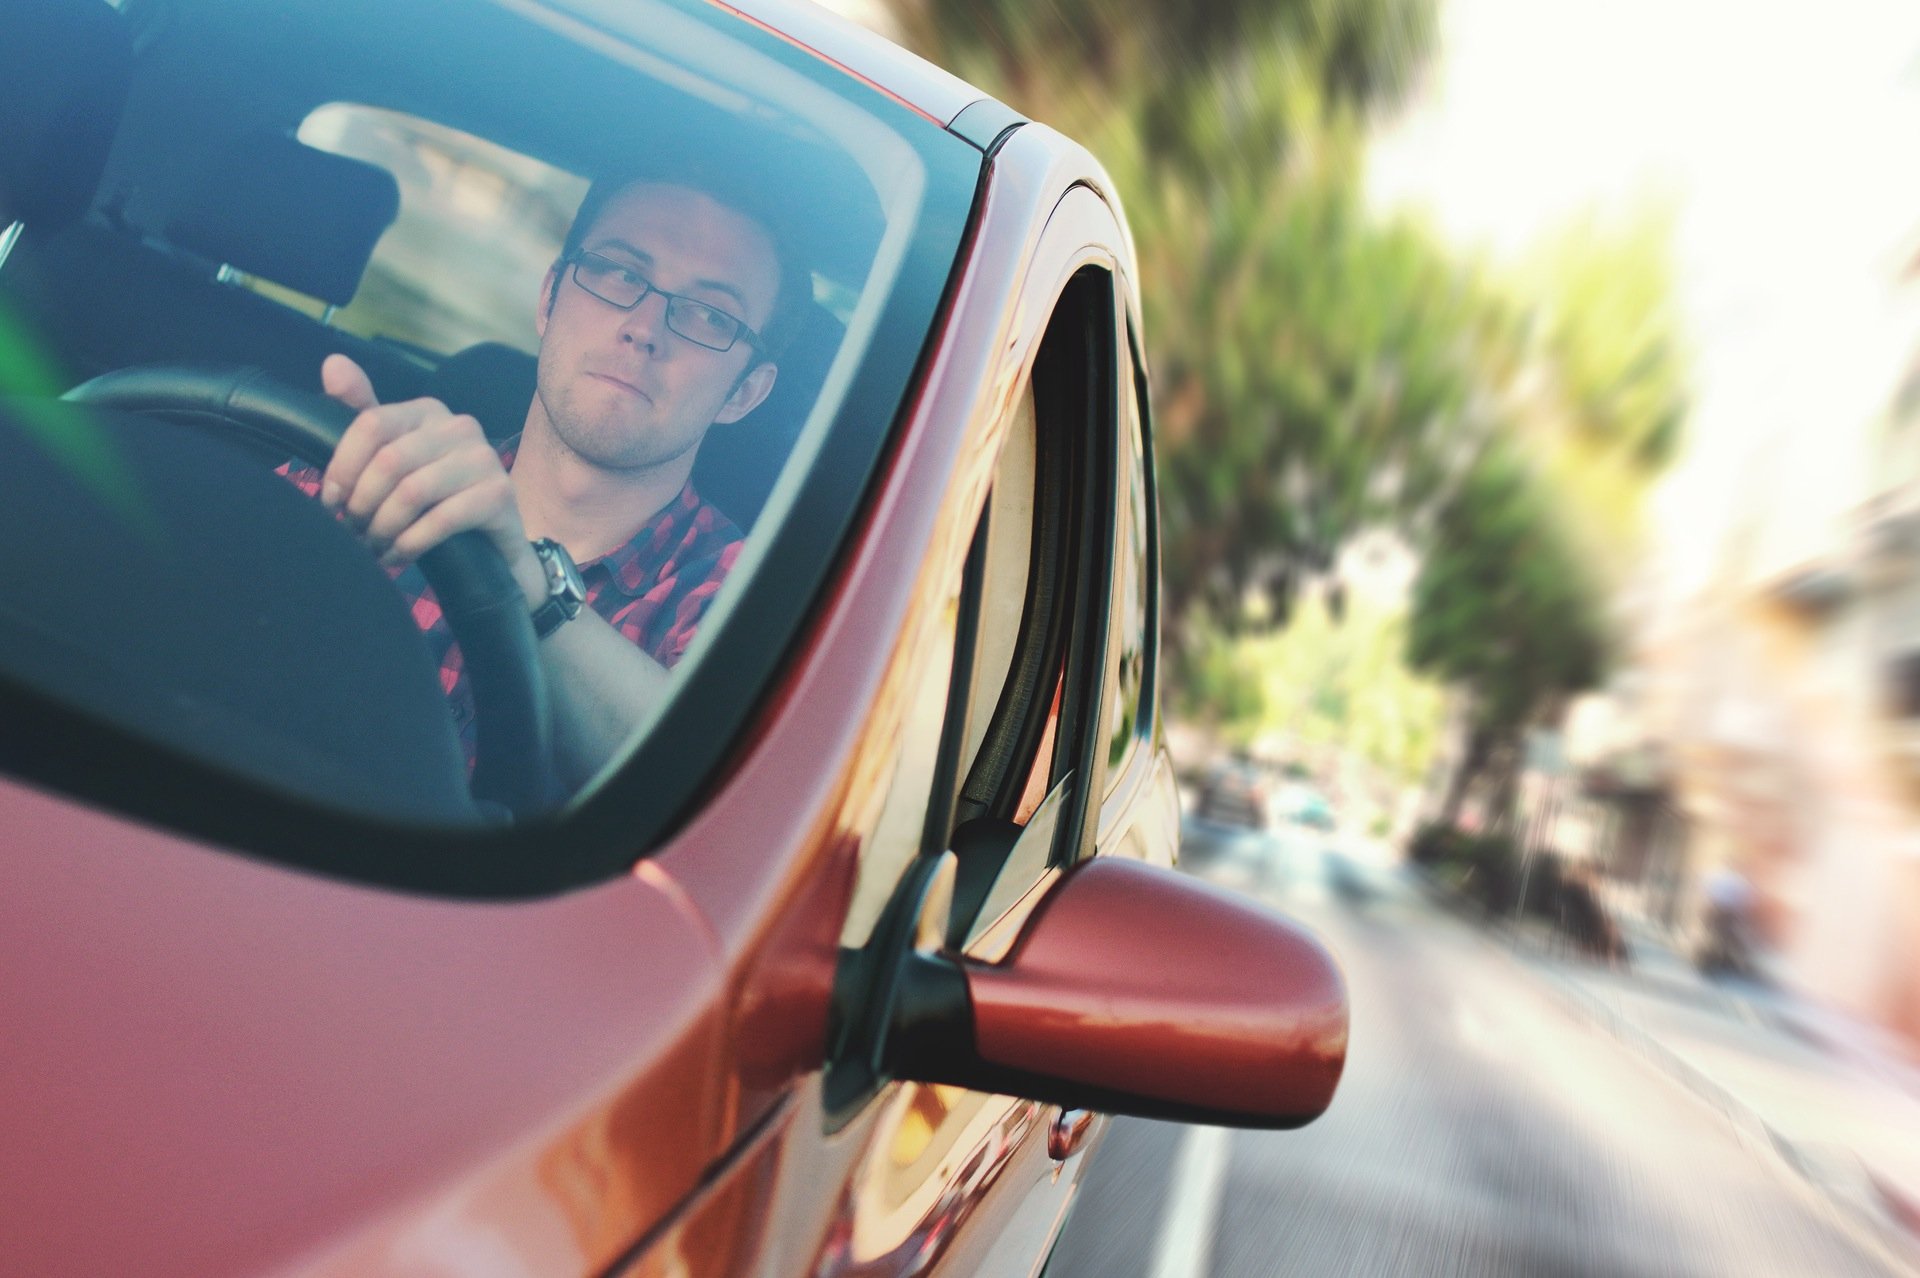 Do you have to buy auto insurance if you only drive occasionally?